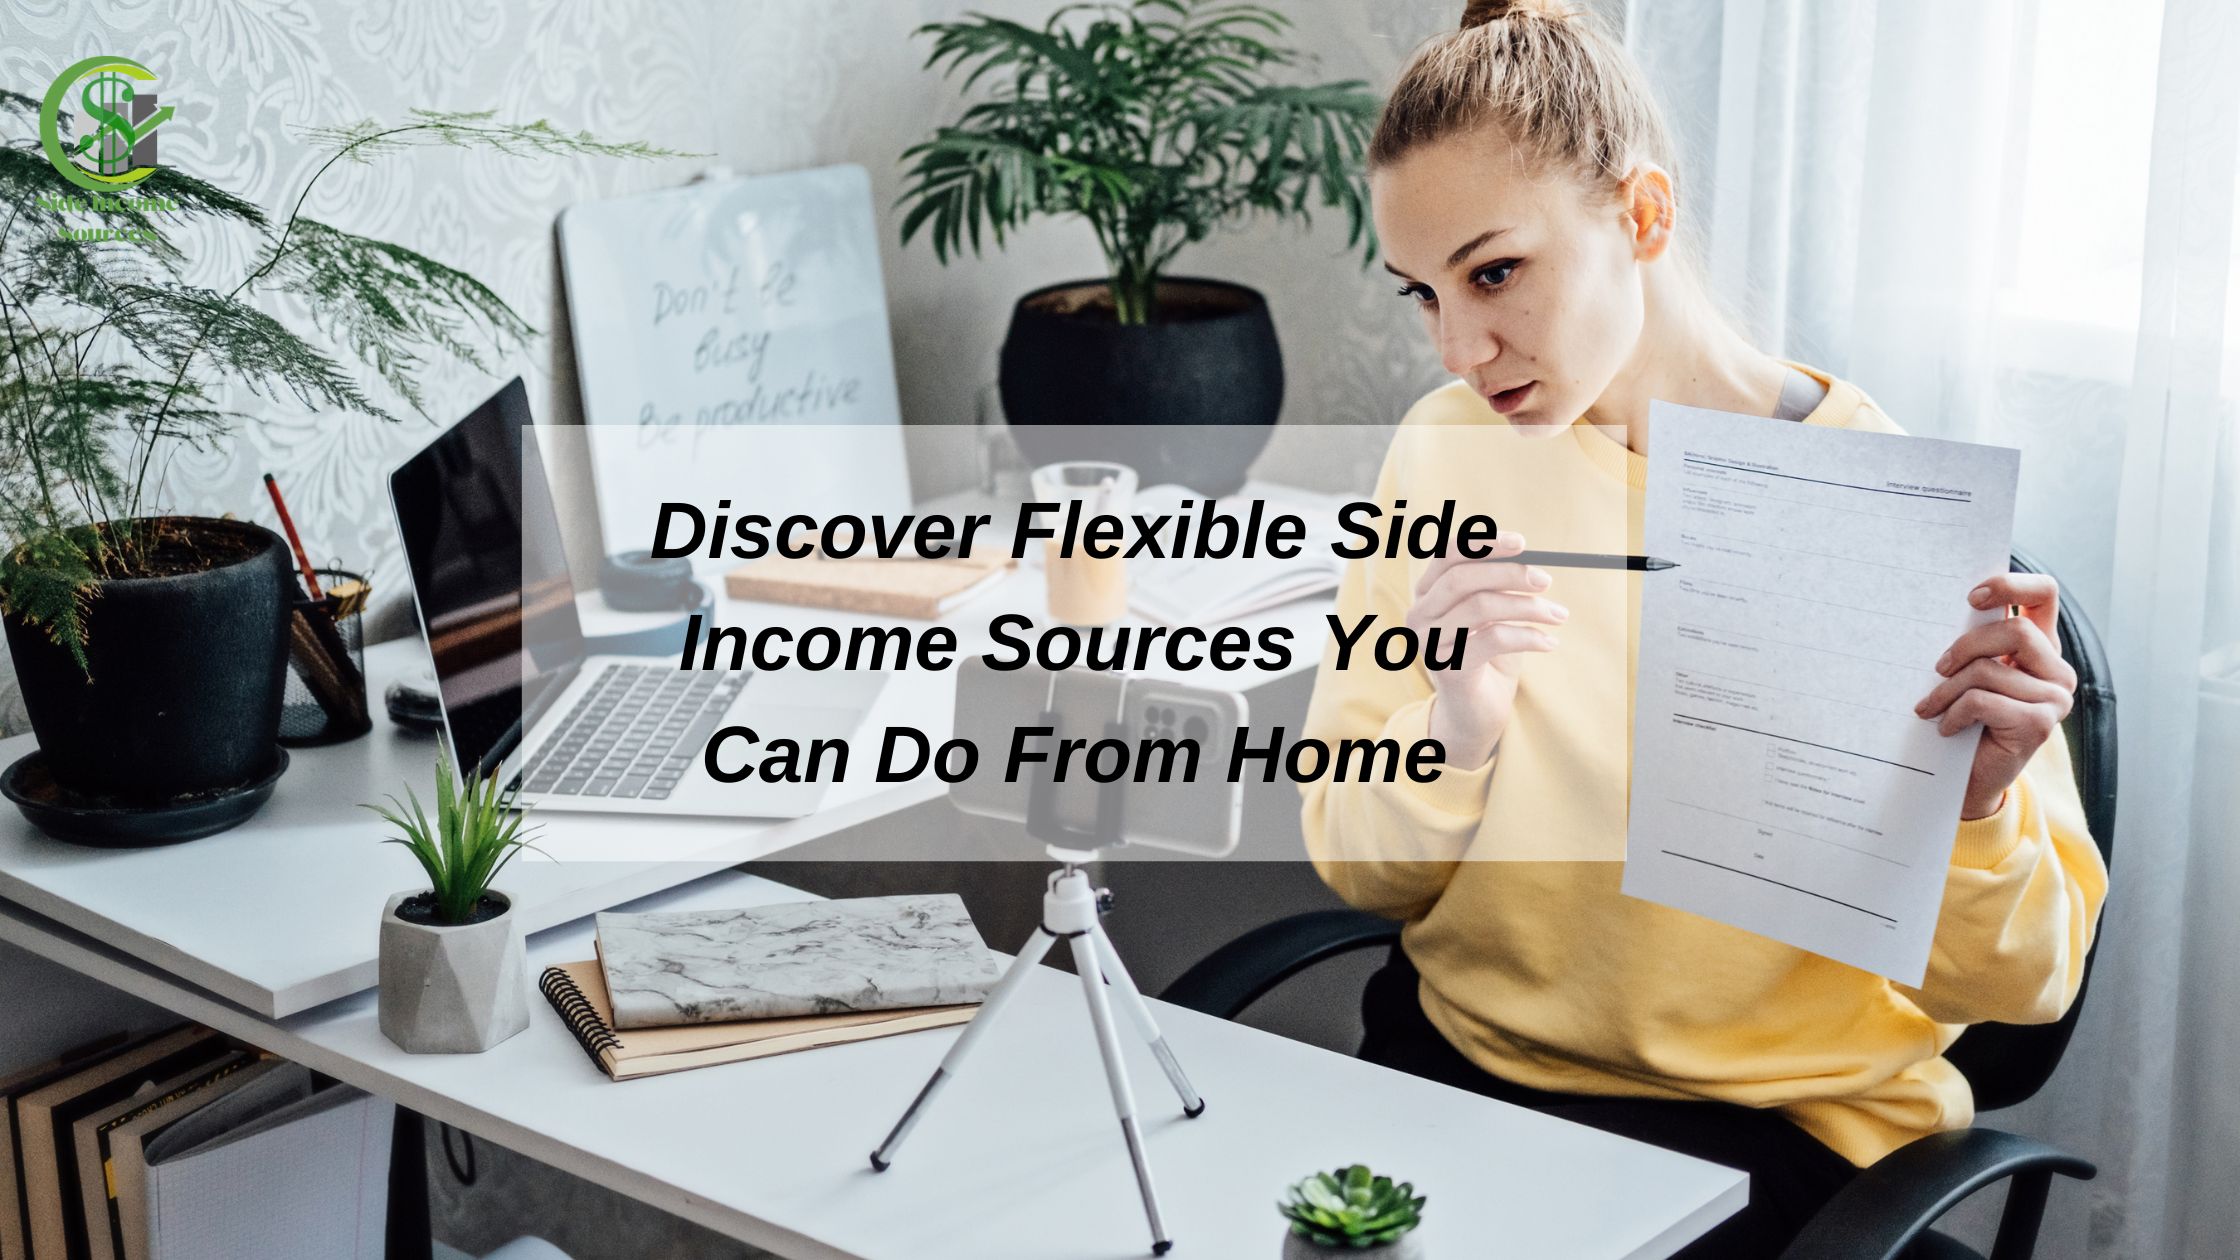 Side Income Sources